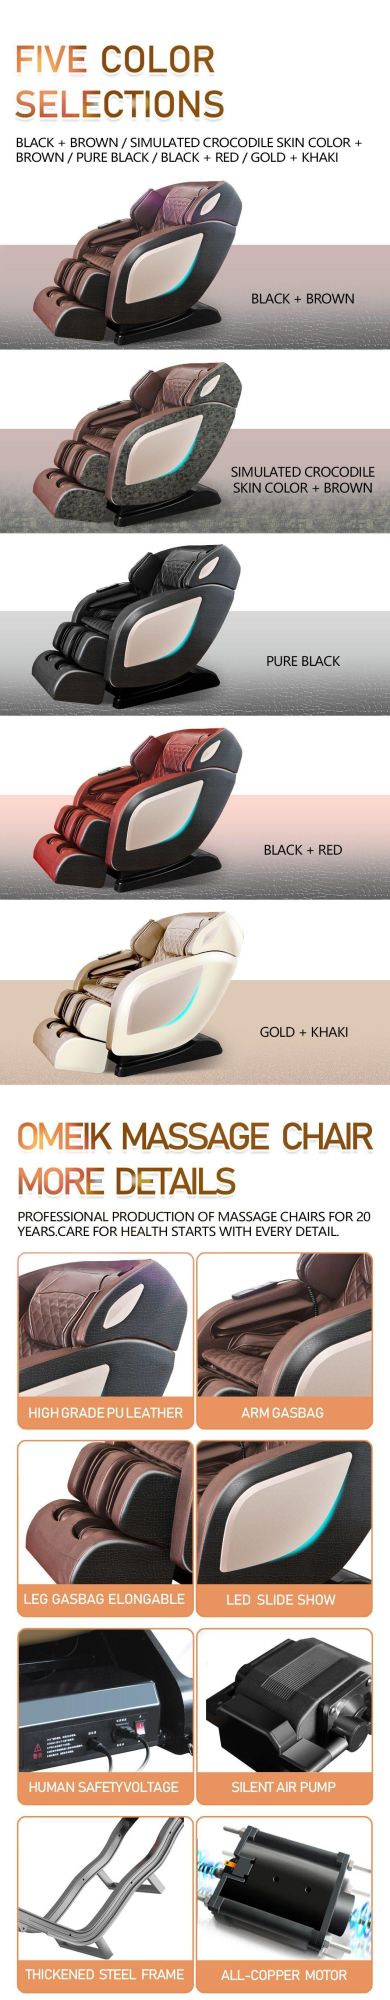 L Shape Track Music Whole Body Airbag Massage Chair for Office